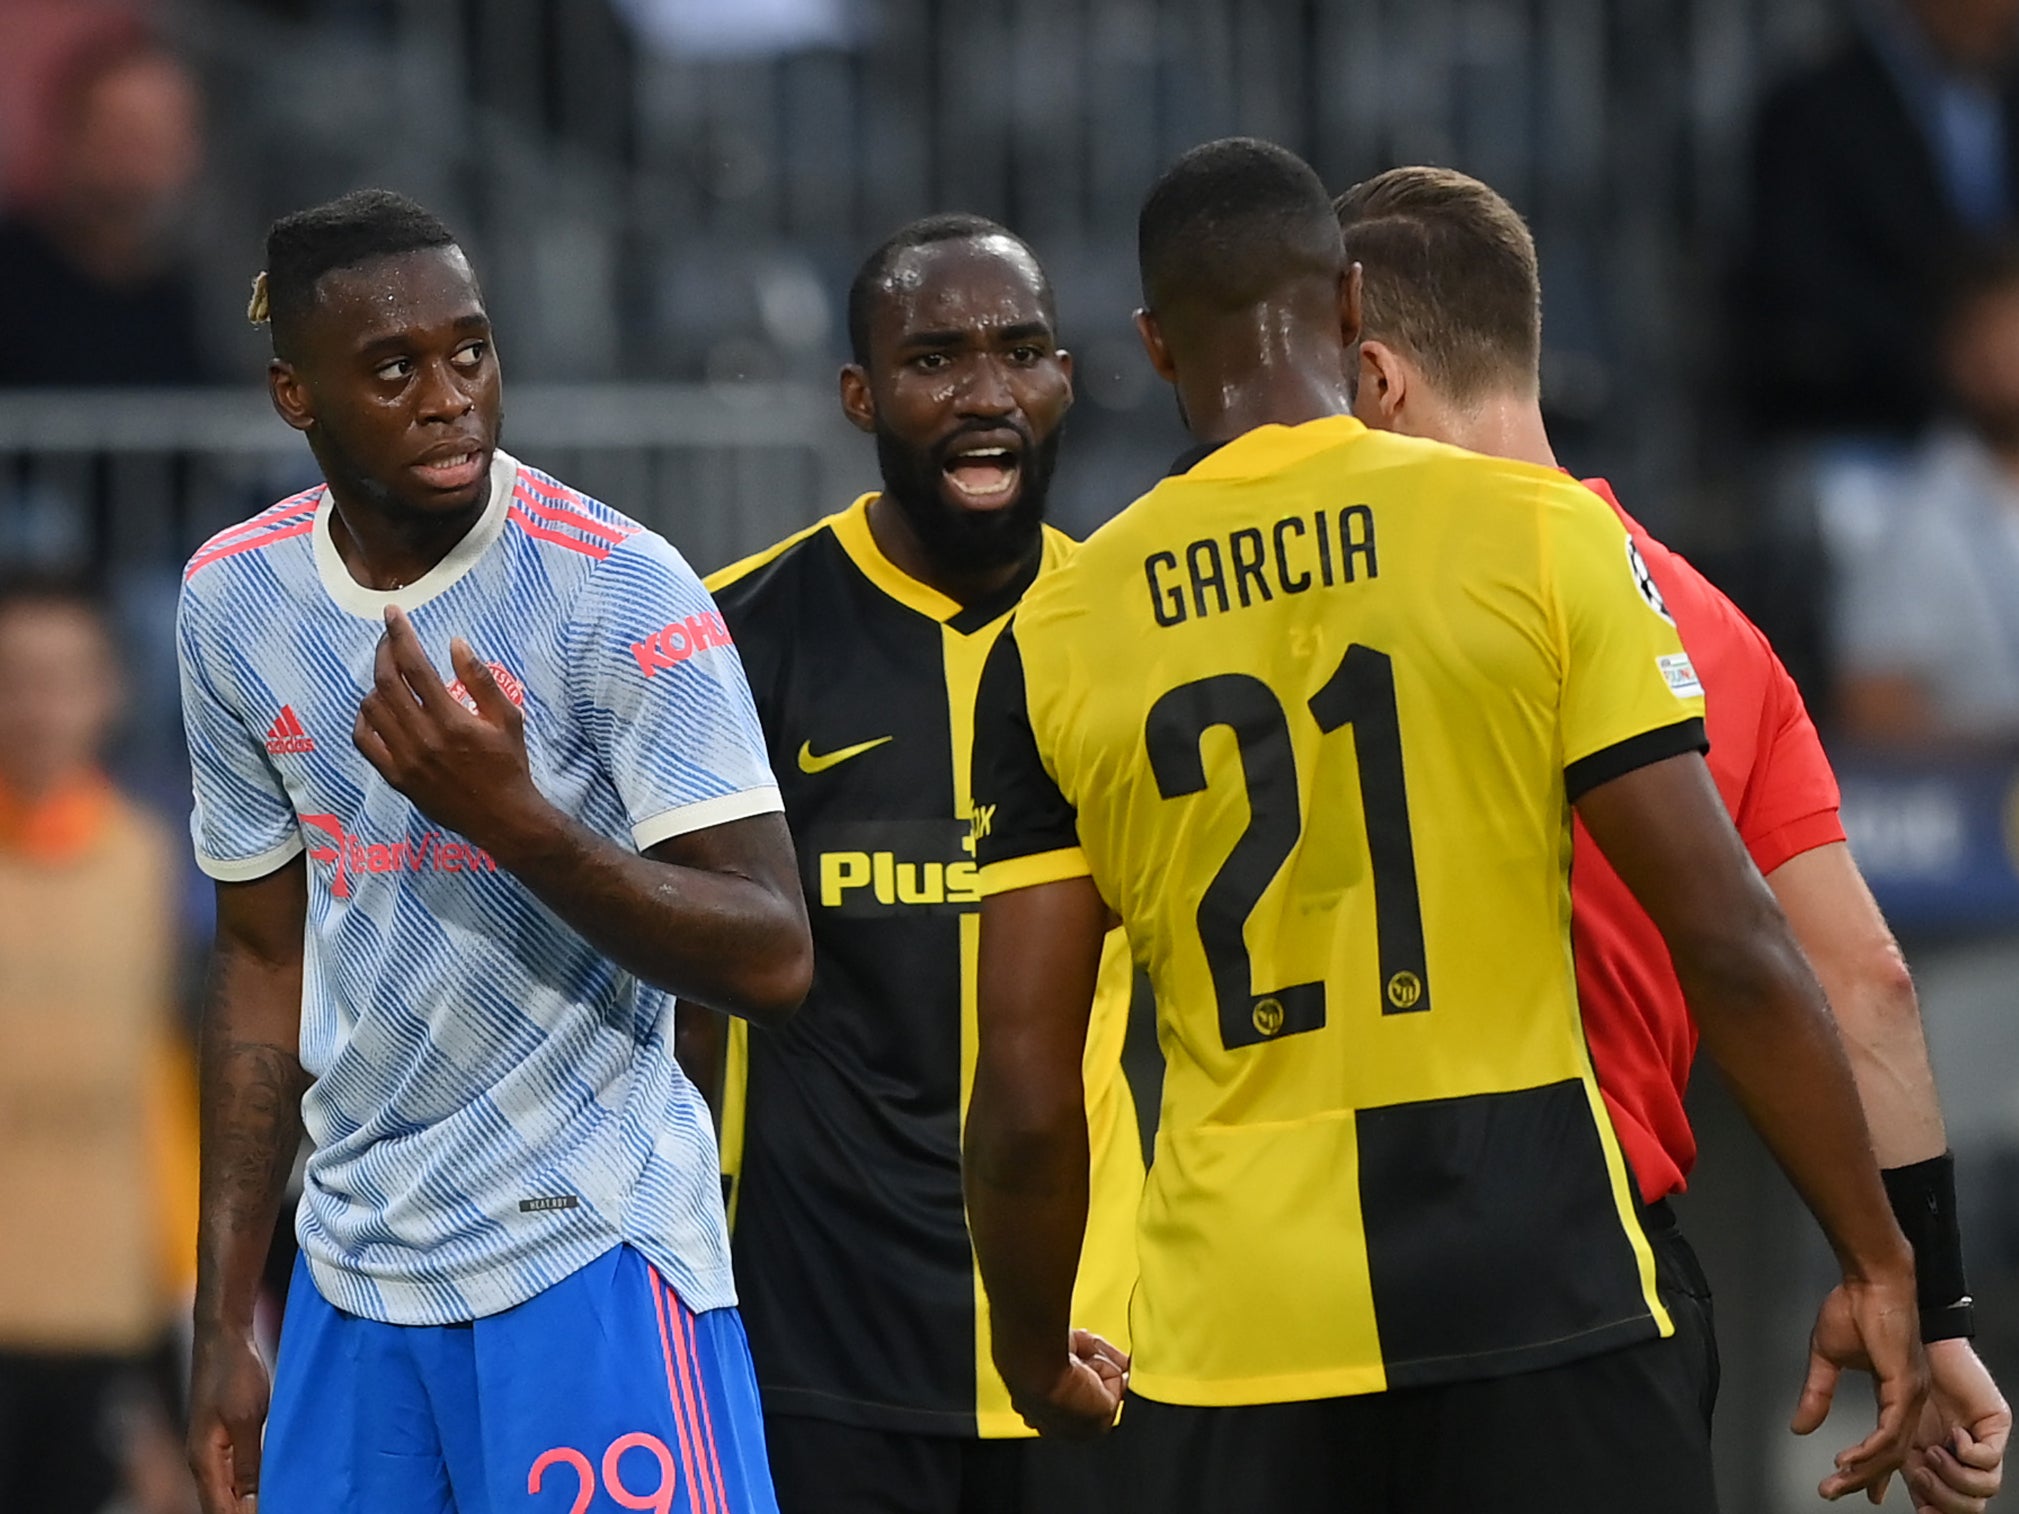 Manchester United right back Aaron Wan-Bissaka was shown a red card against Young Boys